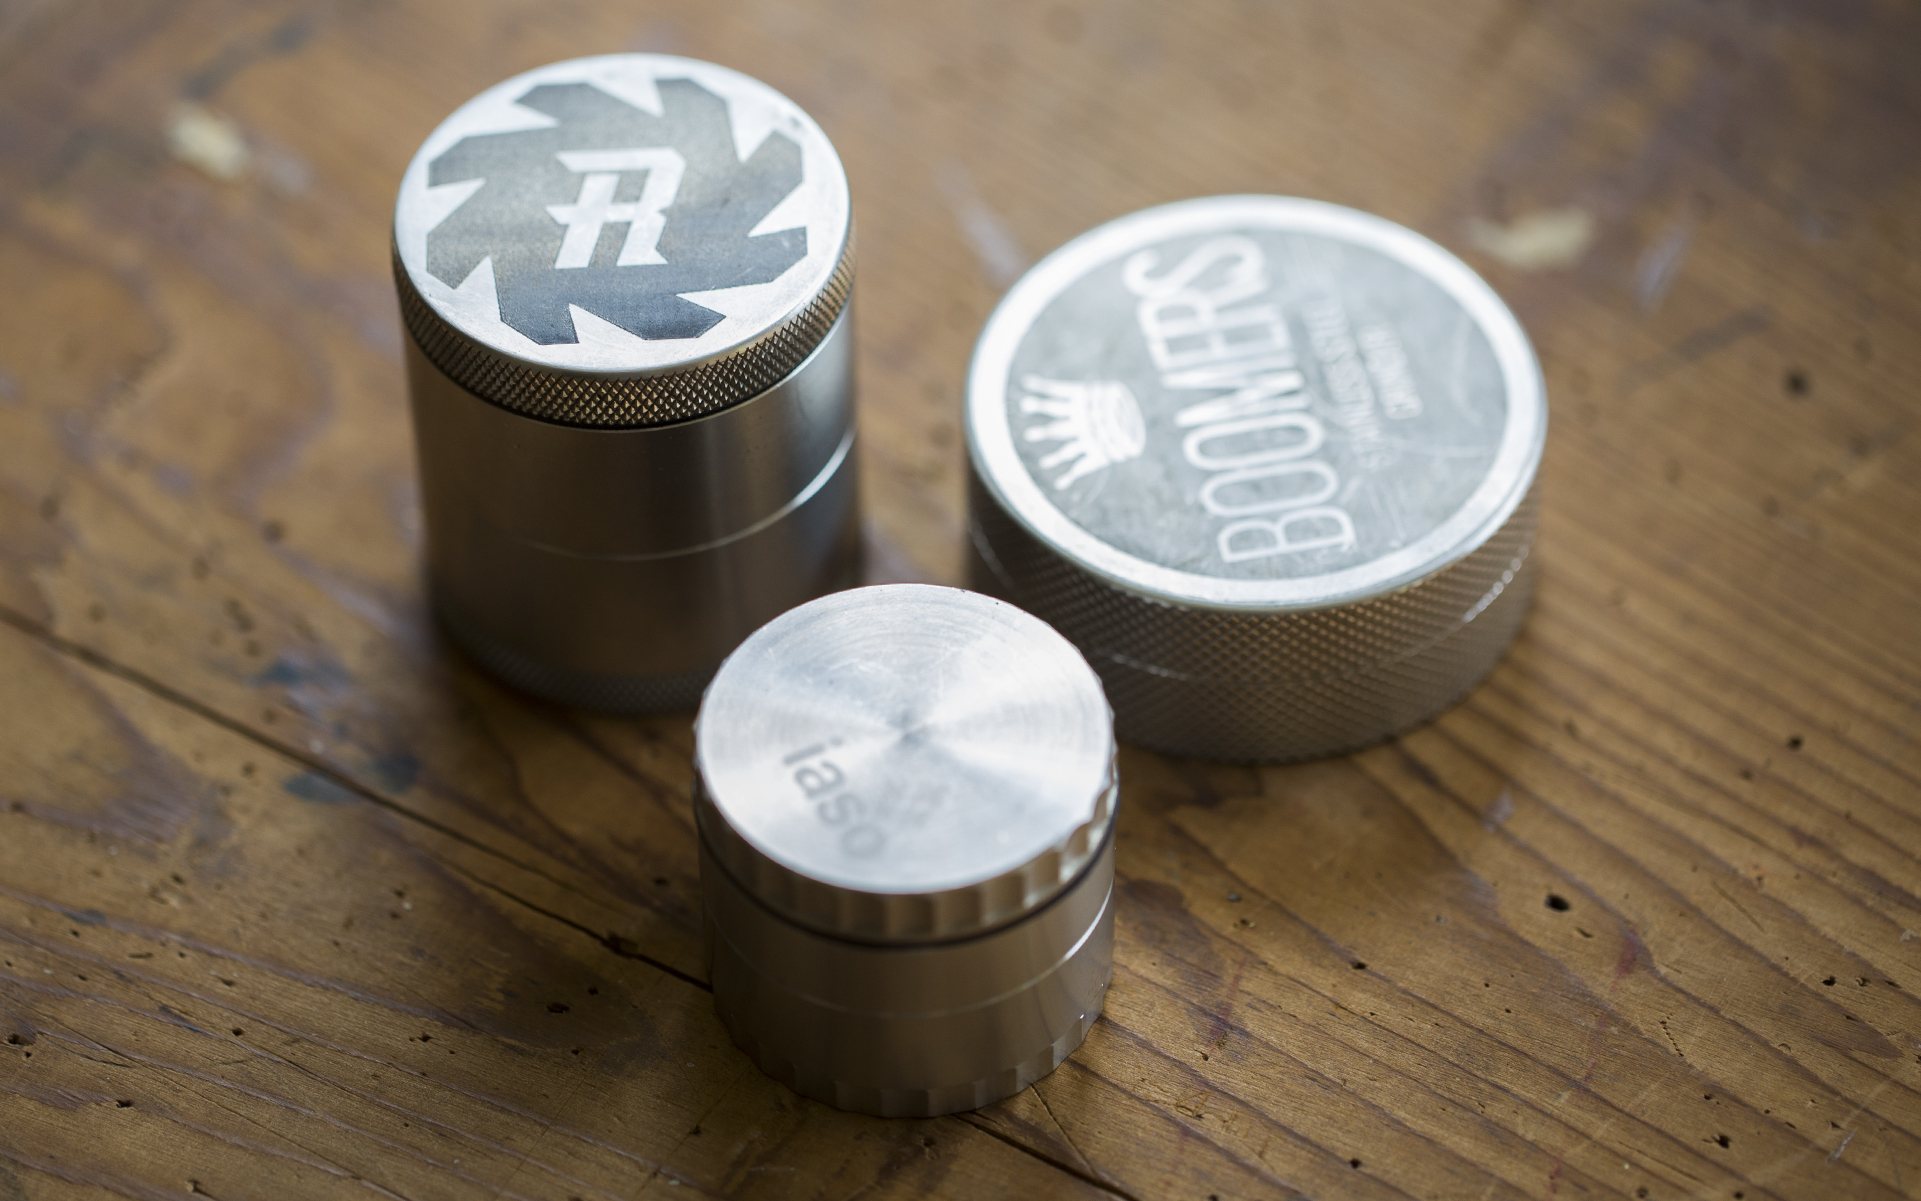 Review: Stainless Steel Grinders Are Finally Here!